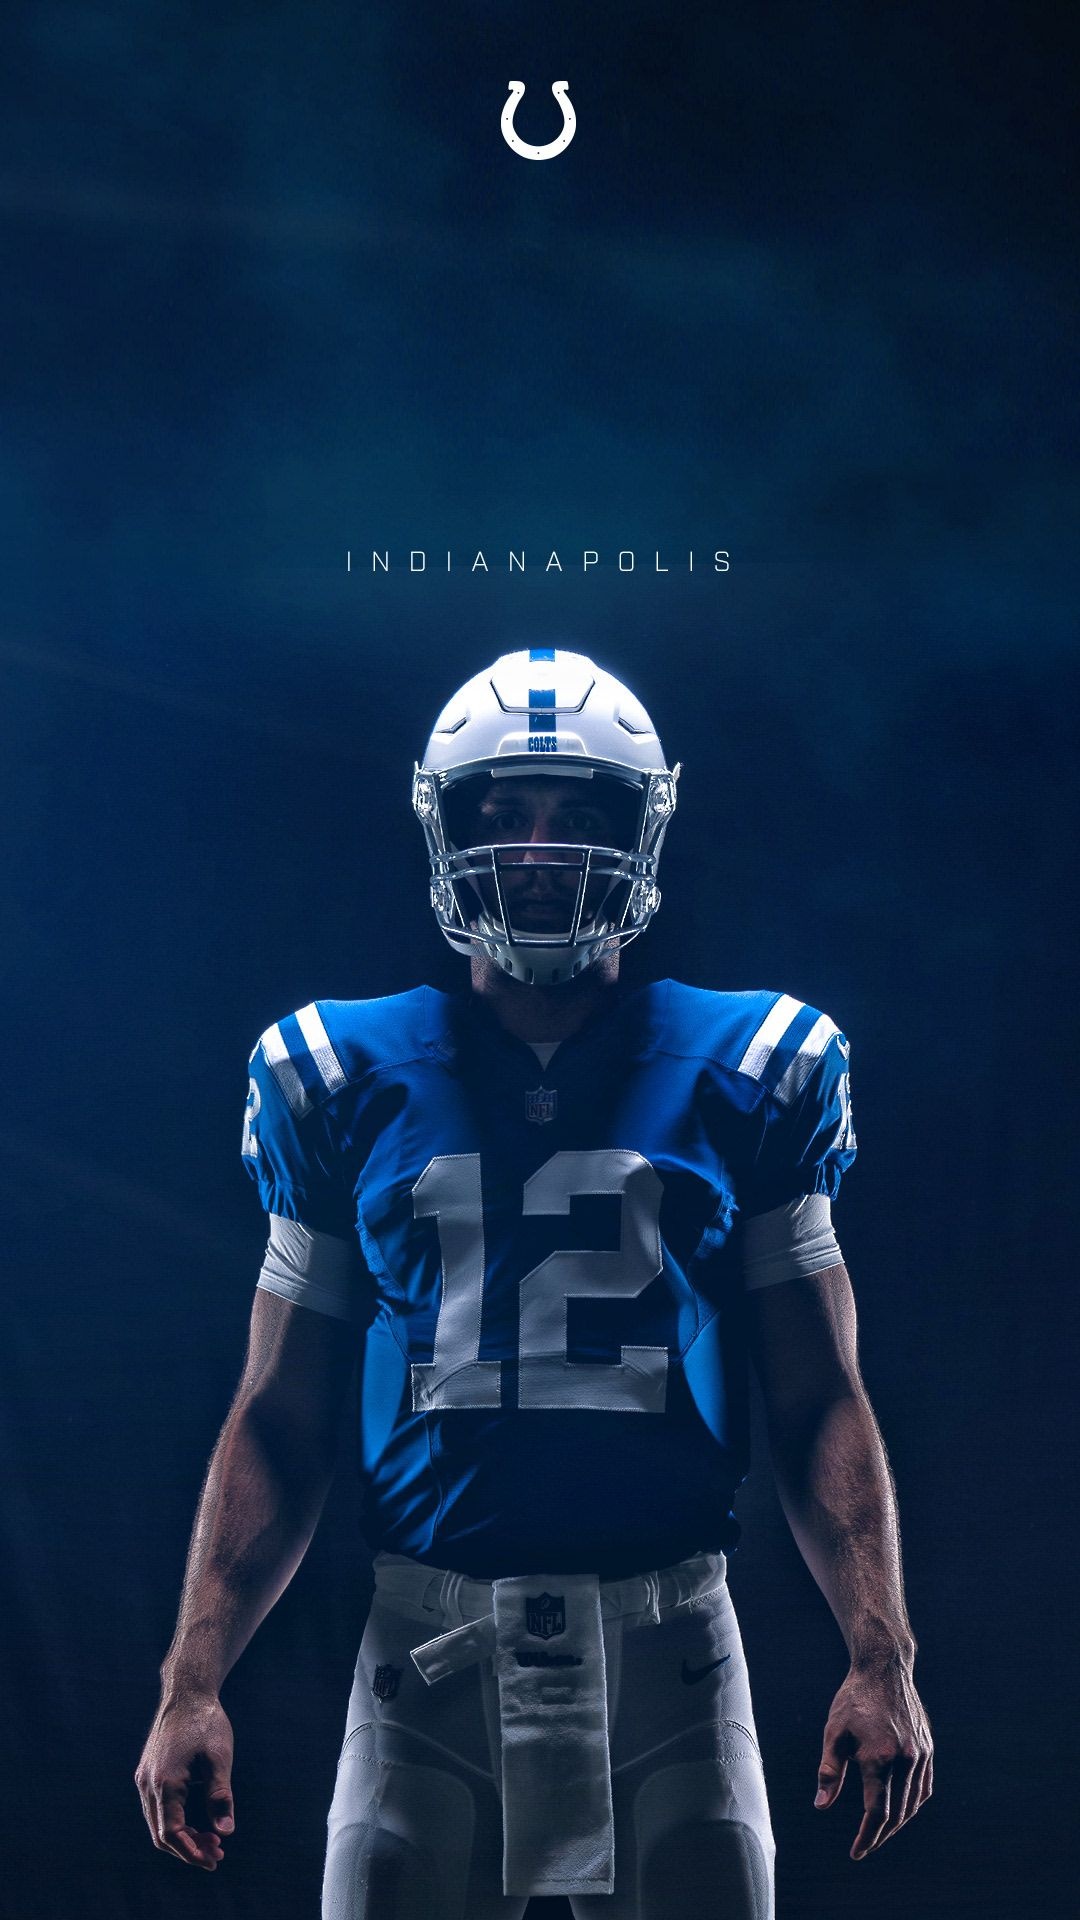 HD wallpaper, Gridiron Glory, Sports Wallpapers, Athletic Heroes, Iphone 1080P Indianapolis Colts Background Image, Nfl Football Players, 1080X1920 Full Hd Phone